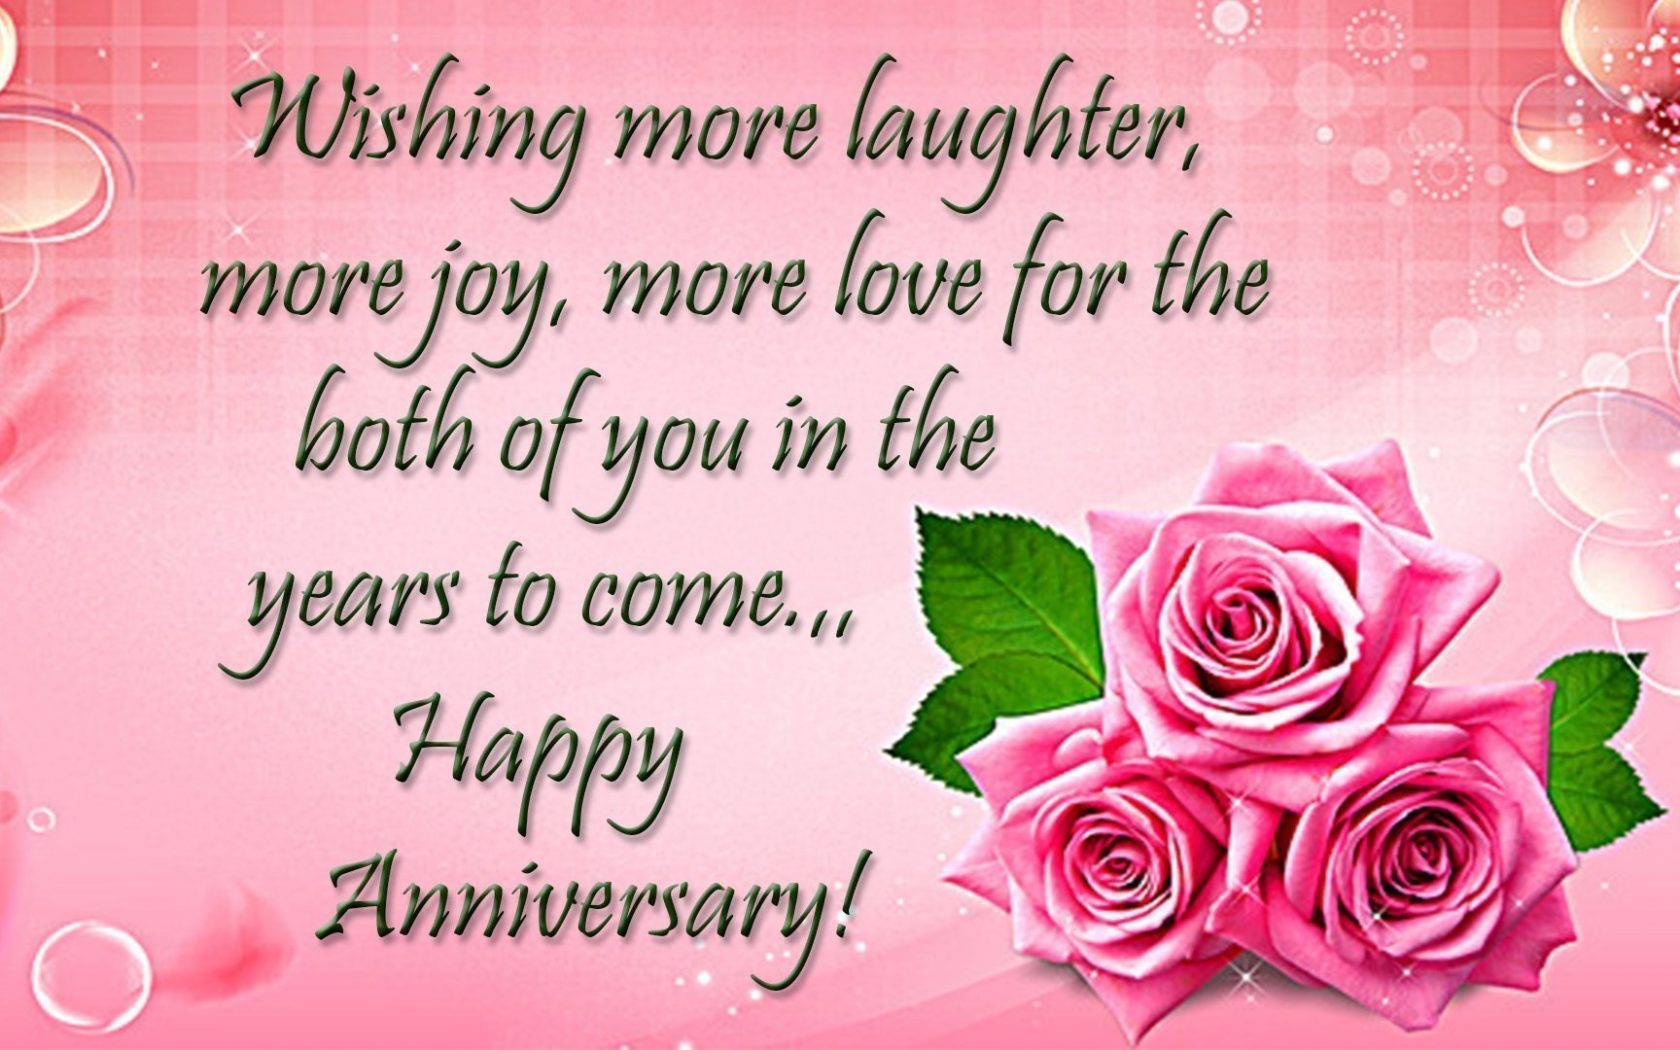 How Do You Wish Happy Anniversary To Both 